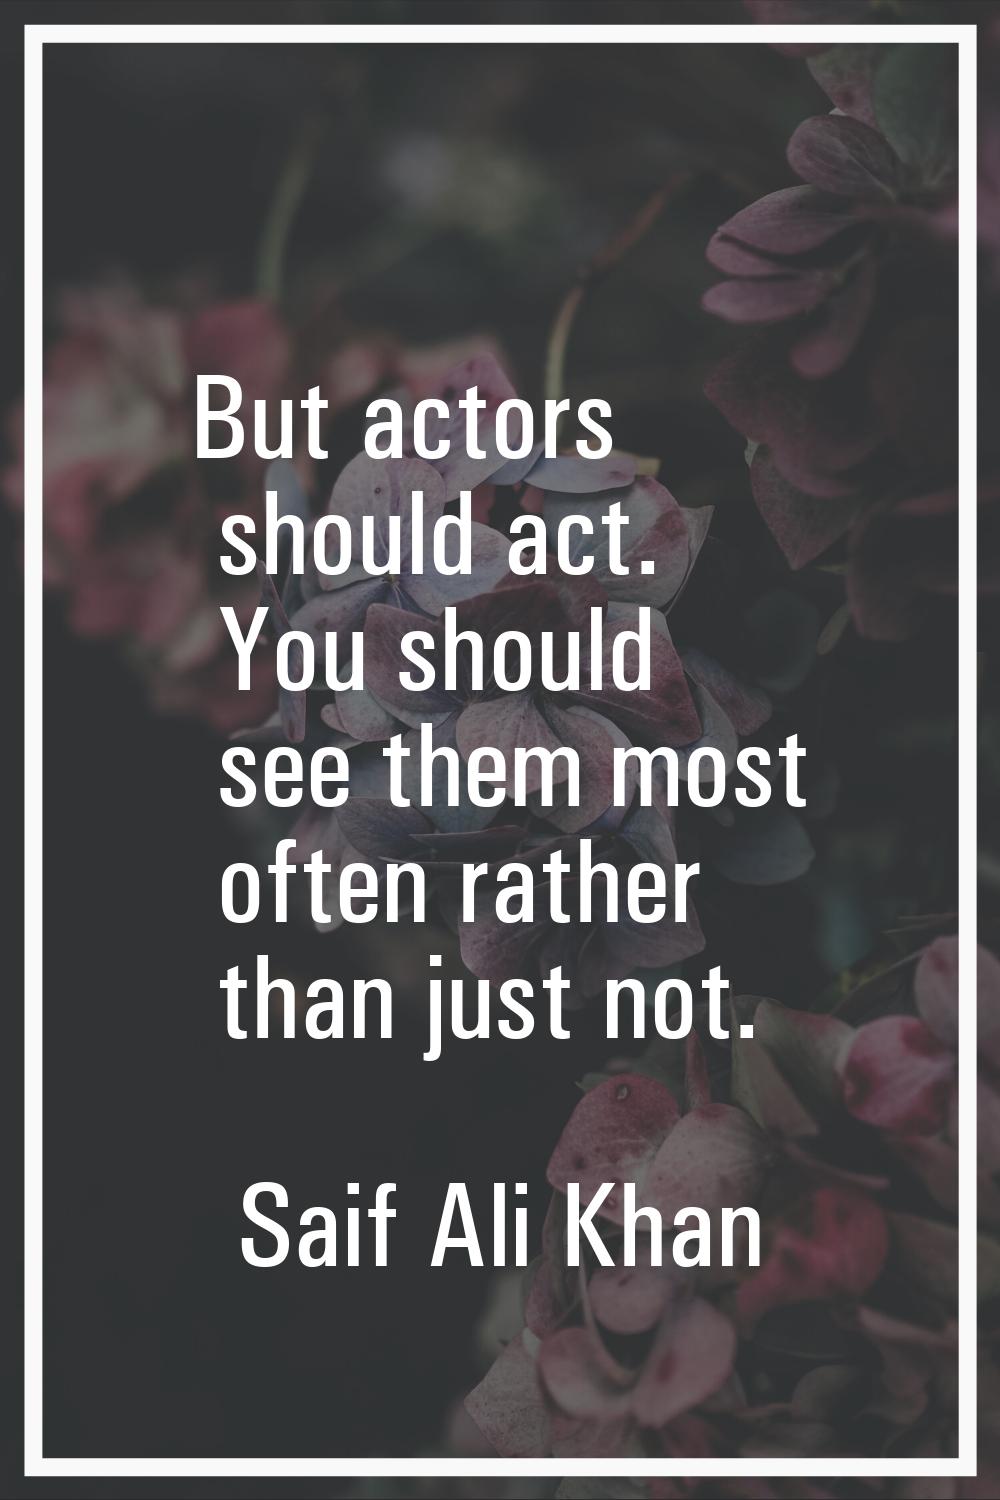 But actors should act. You should see them most often rather than just not.